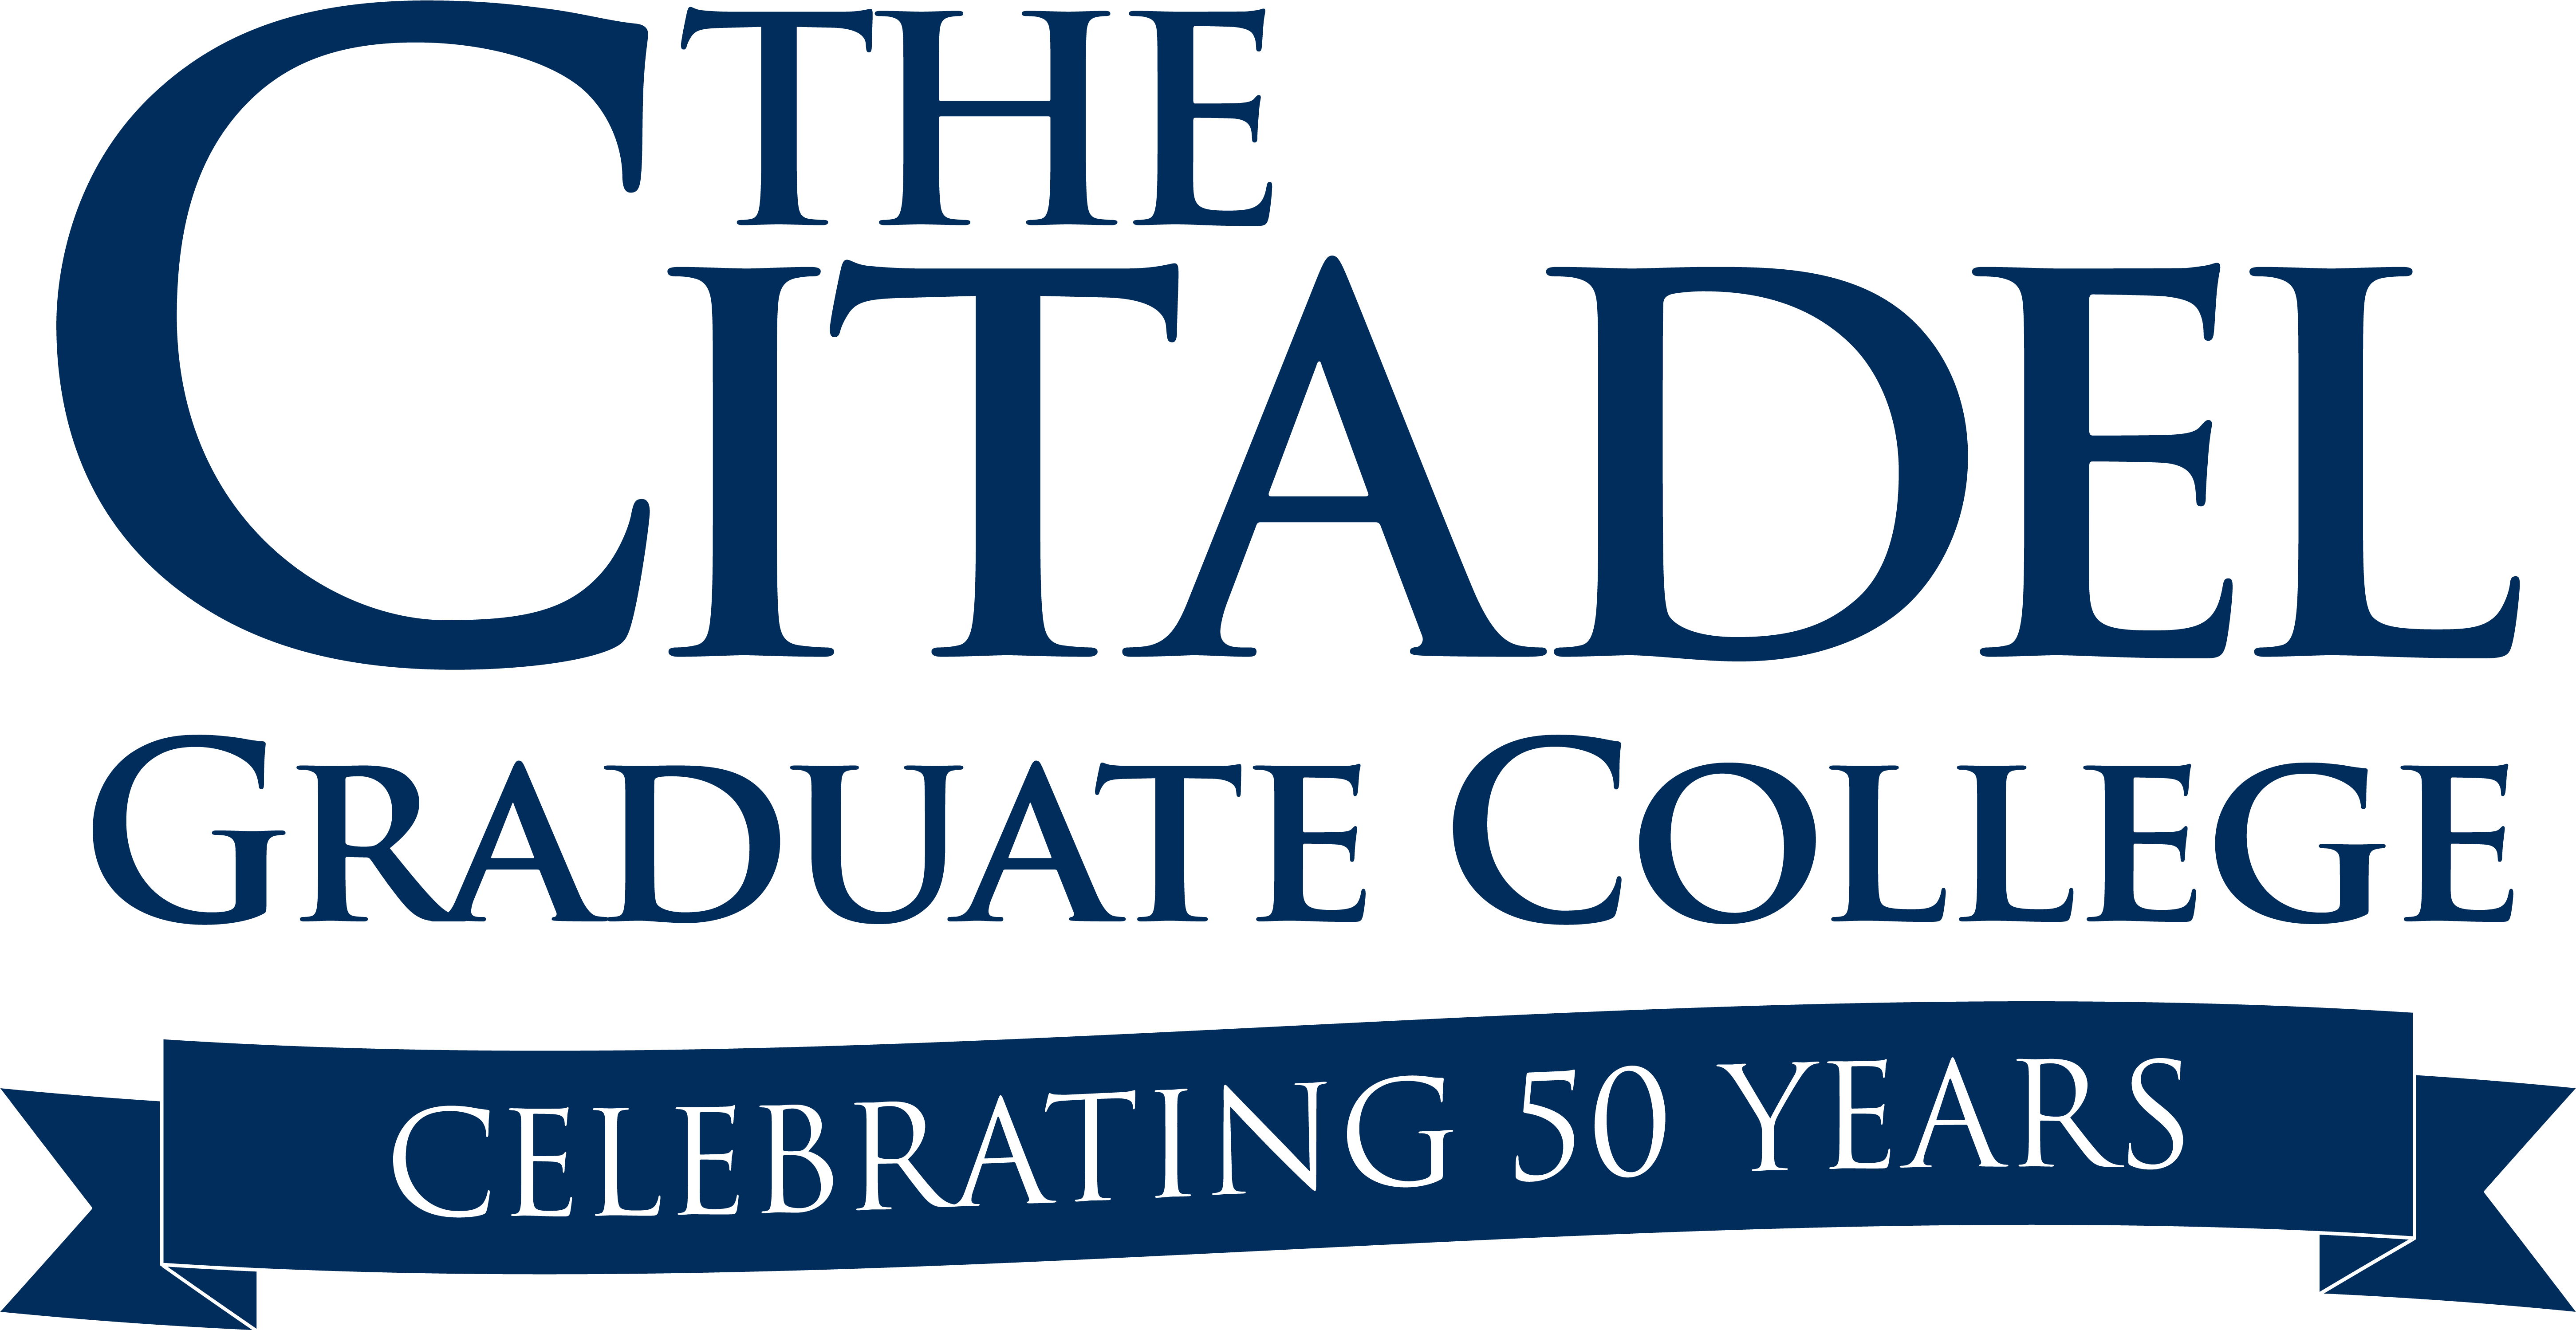 We Are Excited To Celebrate The Citadel Graduate College's - Citadel, The Military College Of South Carolina (6459x3542)